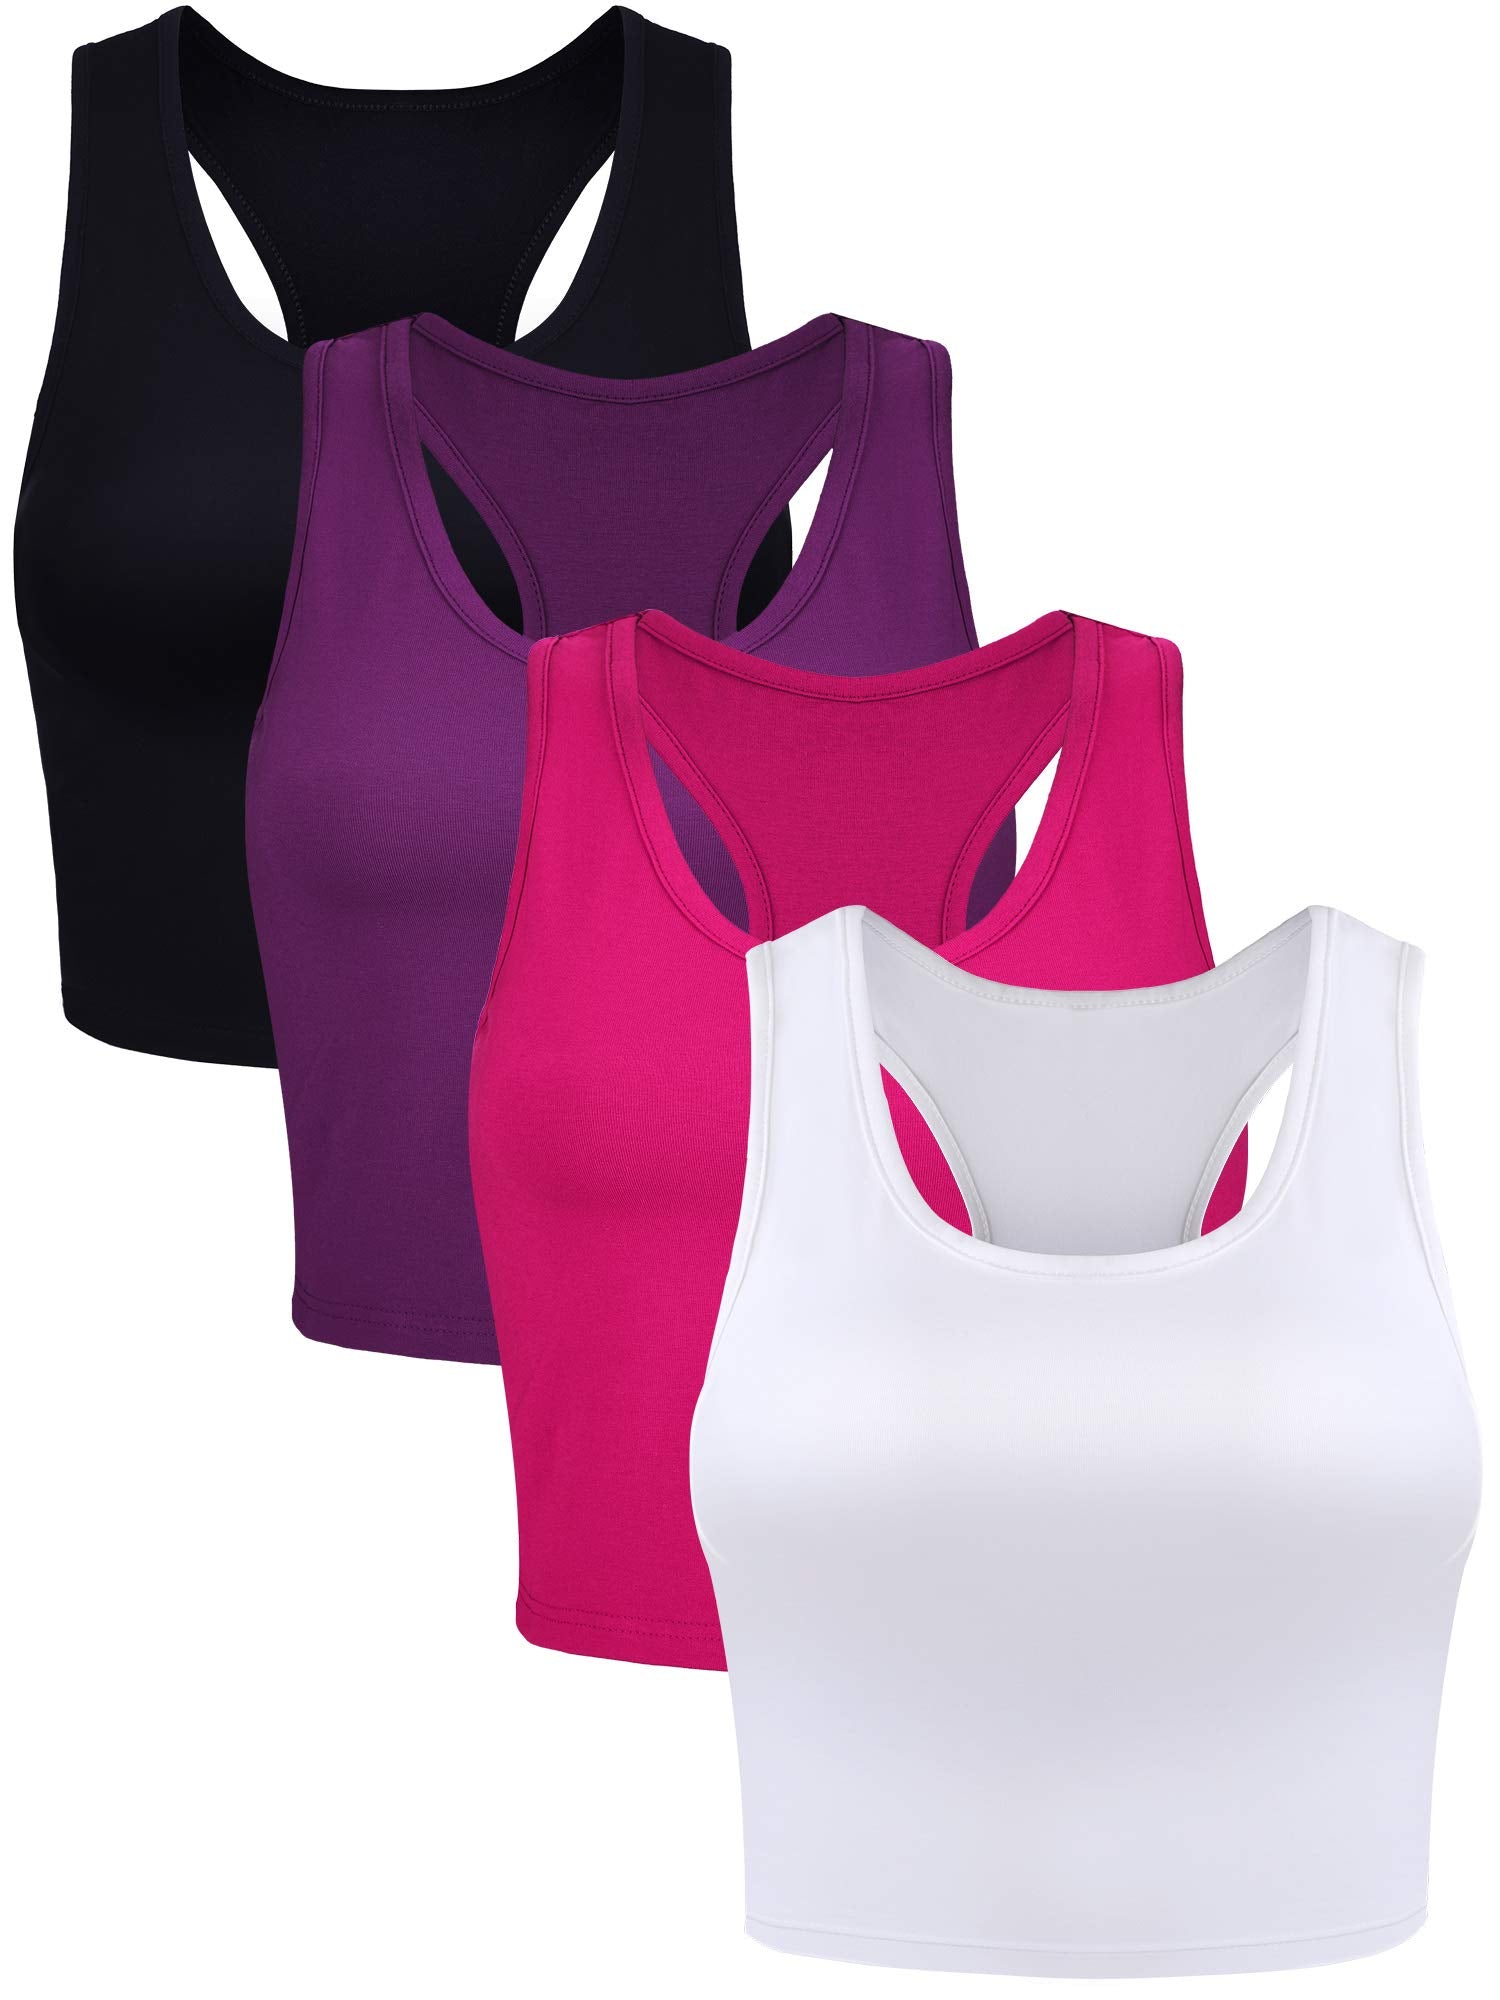 Boao 4 Pieces Basic Crop Tank Tops Sleeveless Racerback Crop Top for Women(Black, White, Rose Red, Purple,Small)